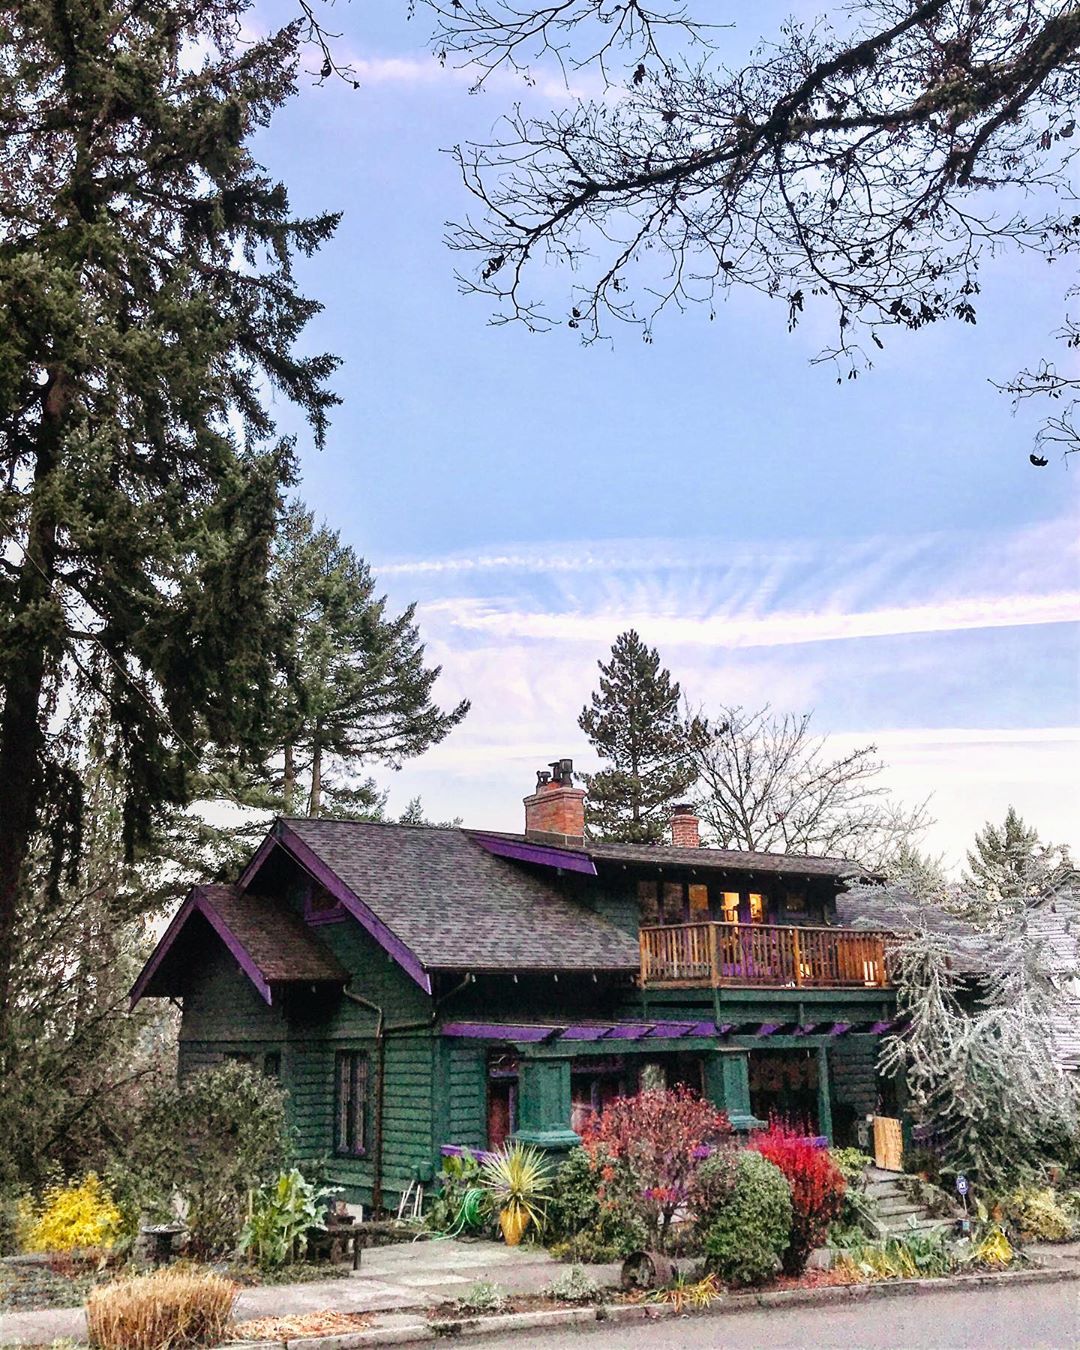 home in forest park, portland, OR with green and purple paint with nice landscaping photo by Instagram user @emily.nitrate